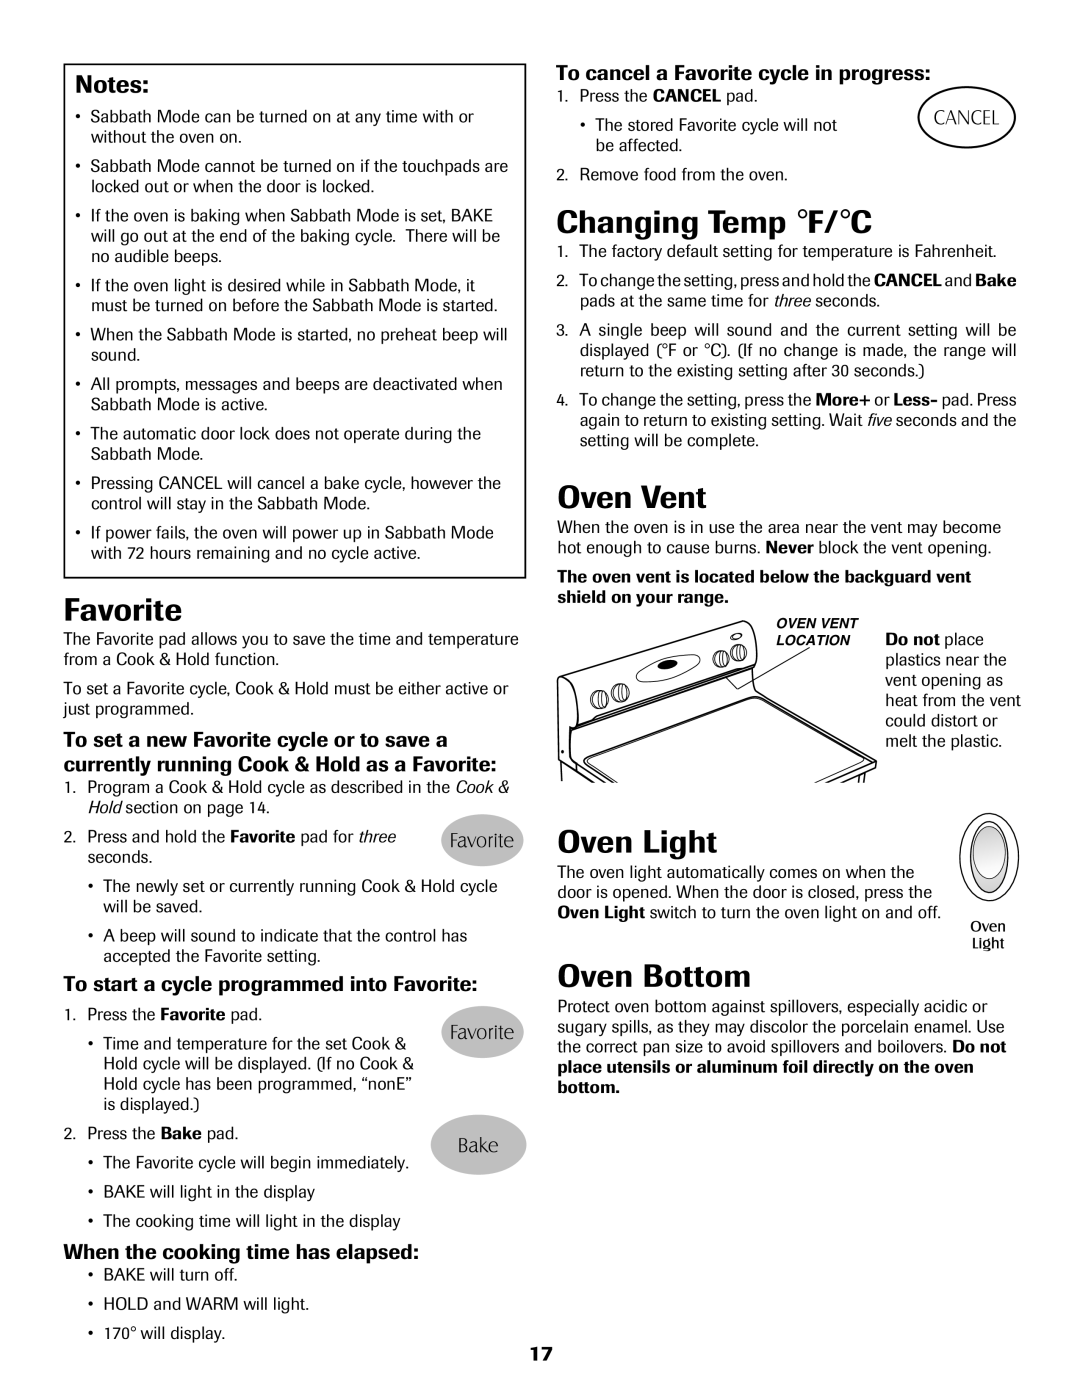 Maytag MER5775RAW Changing Temp F/C, Oven Vent, Oven Bottom, To start a cycle programmed into Favorite, Oven Light 